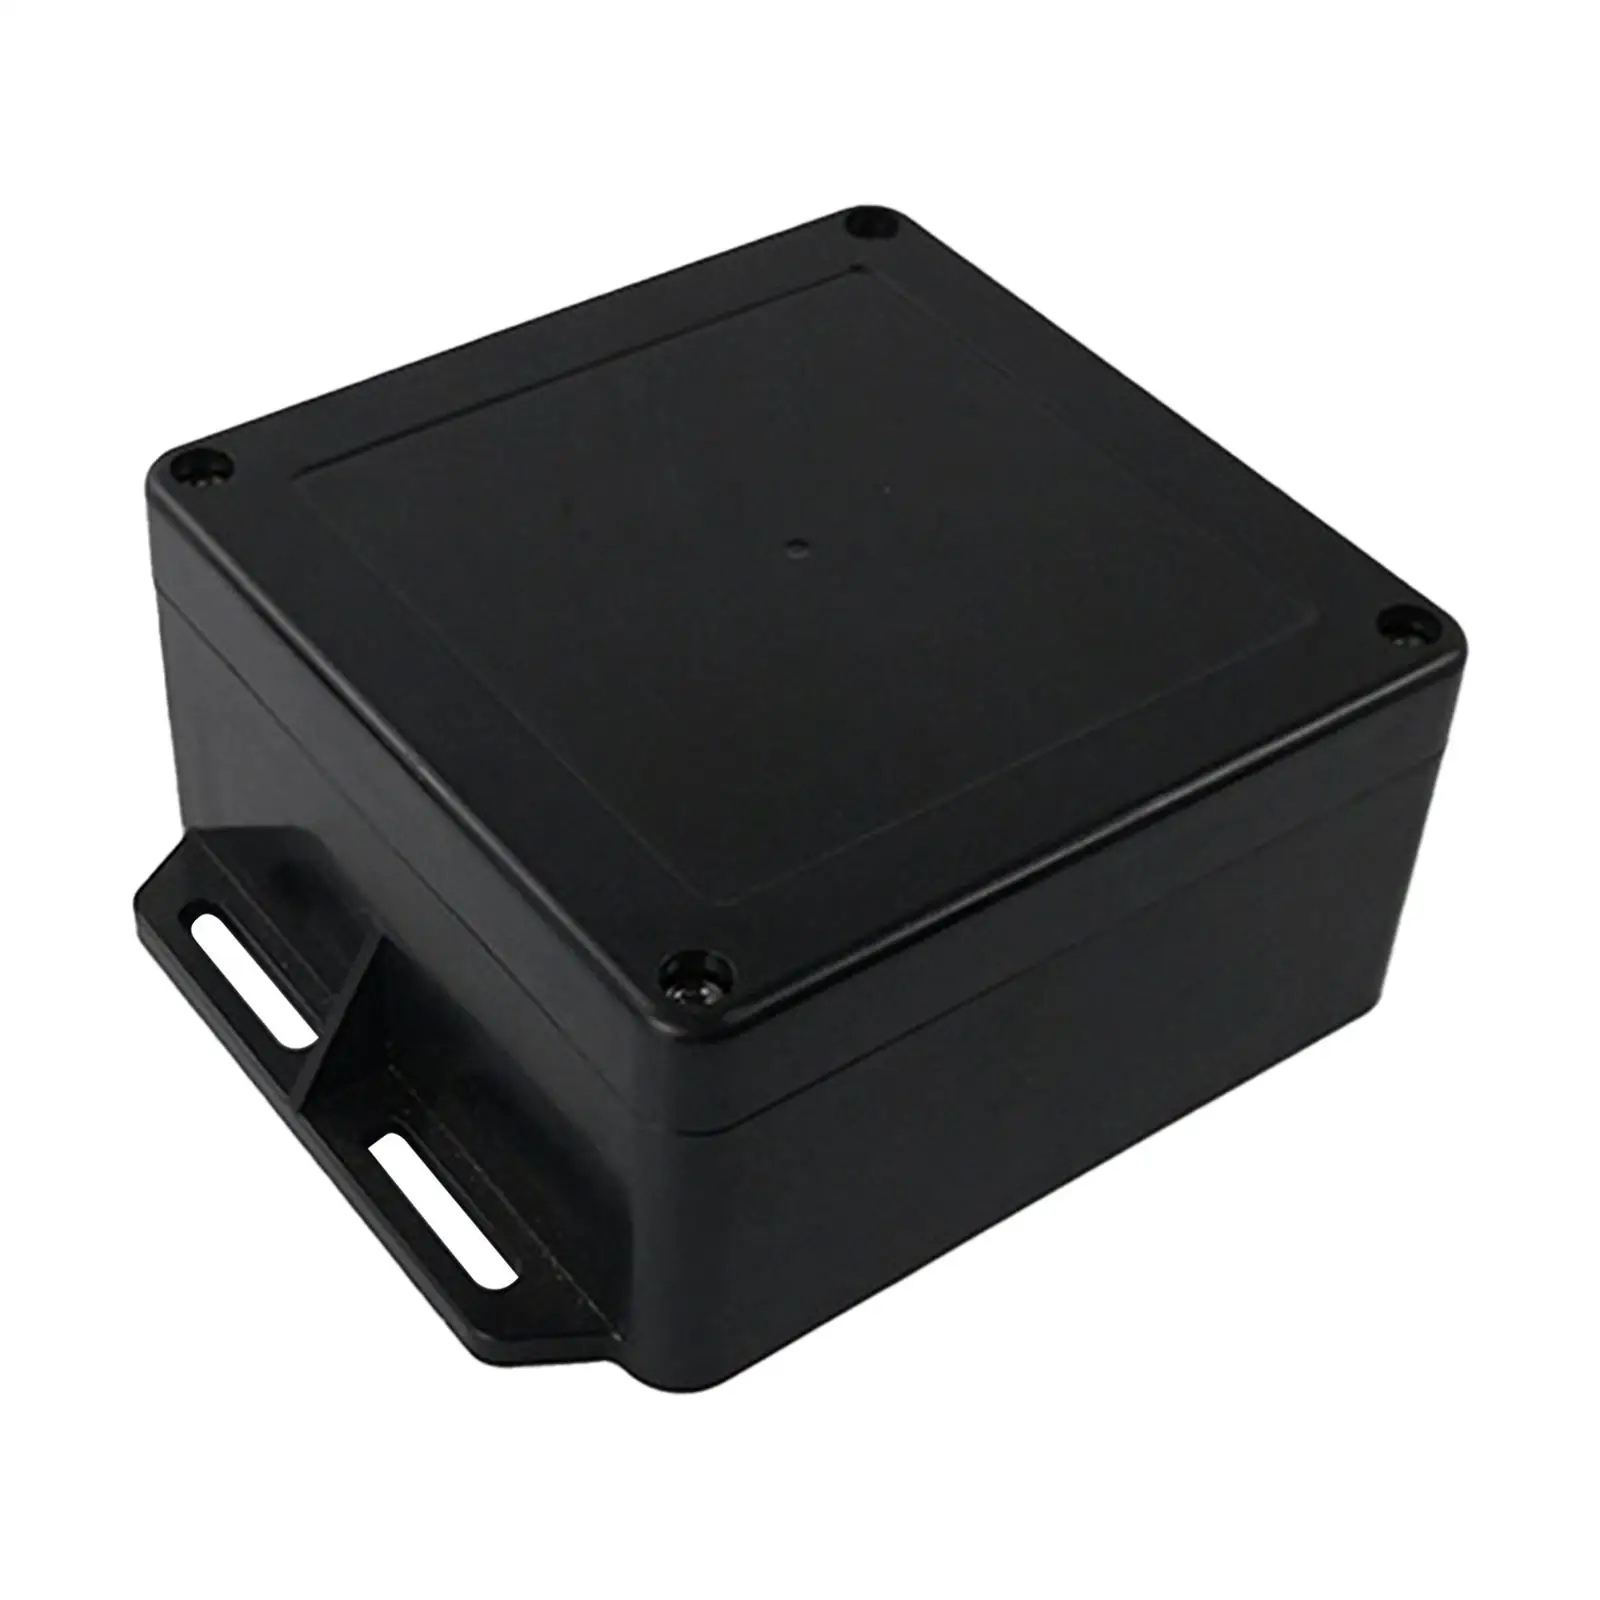 Waterproof Electrical Junction Box Electrical Project Enclosure Electrical Project Case Housing Electrical Boxes 12cmx12cmx6cm